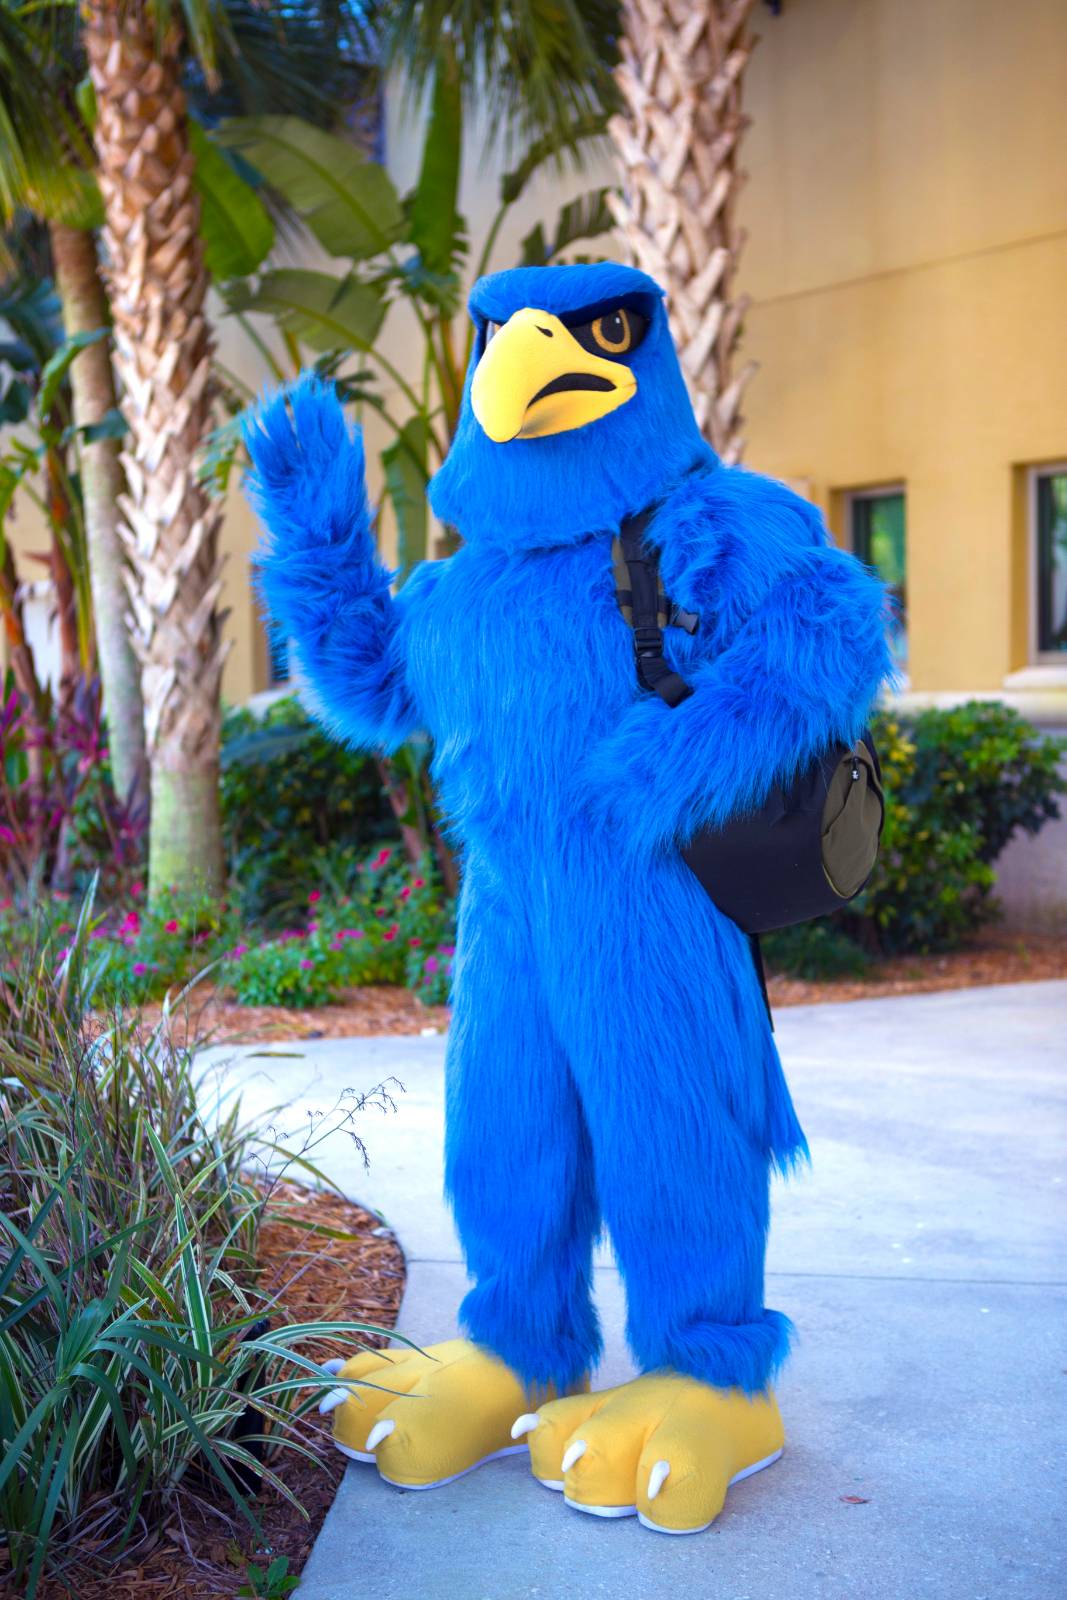 Freddie Falcon with hand raised wearing a backpack